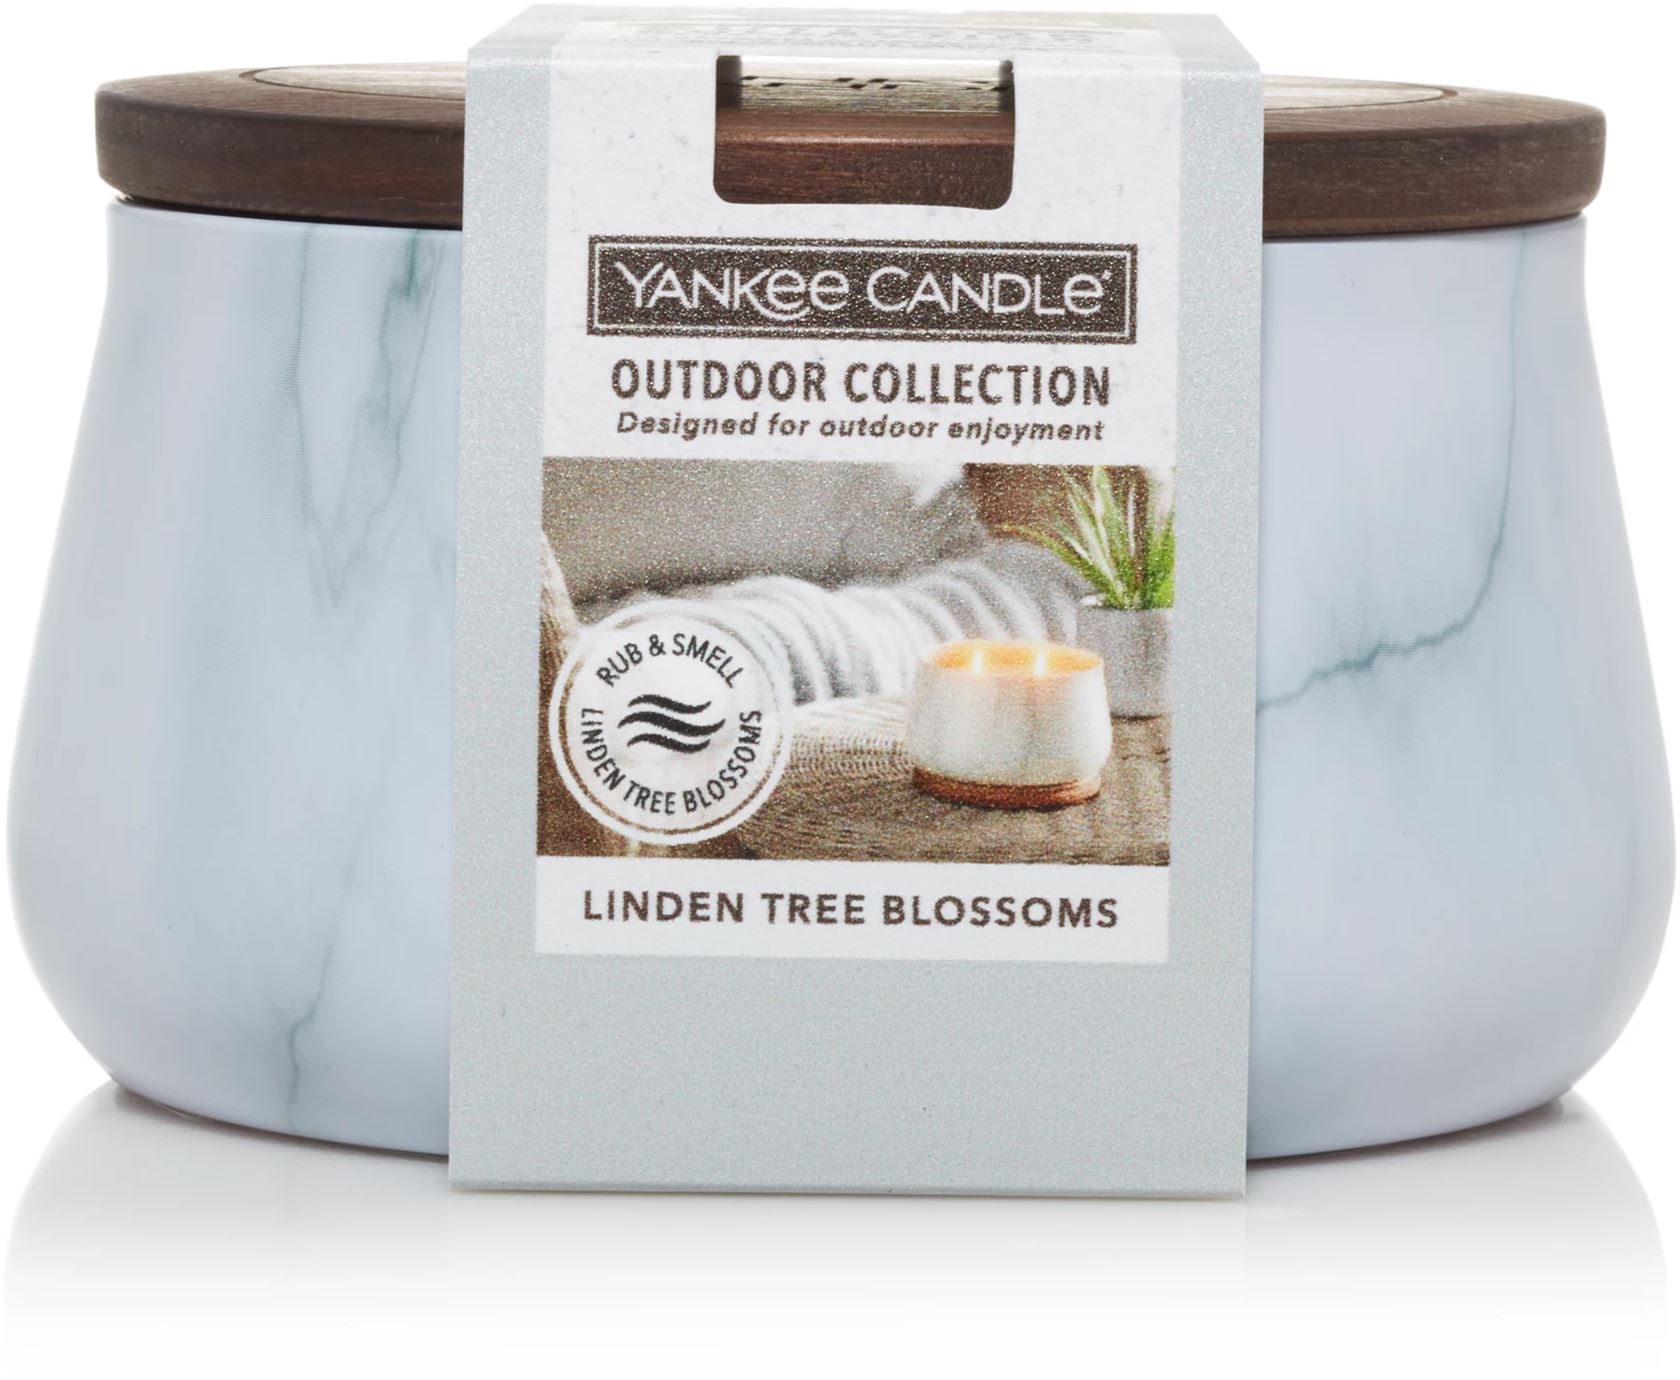 Linden-Tree-Blossoms-Outdoor-Candle